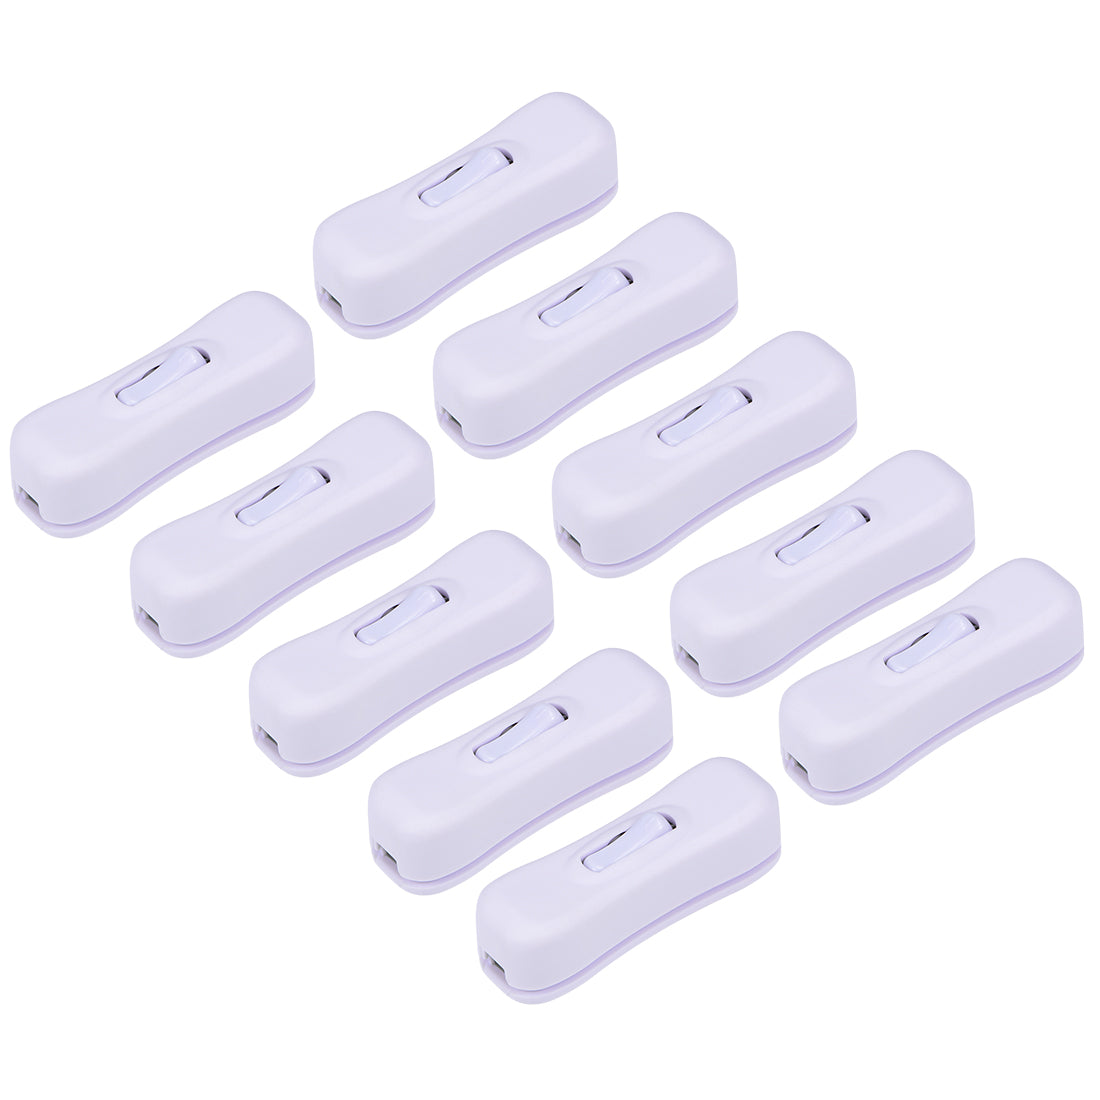 uxcell Uxcell Inline Cord Switch AC 250V 2A SPST Feed-Through Rocker Switch for Bedroom Table Lamp Desk Light, White 10pcs